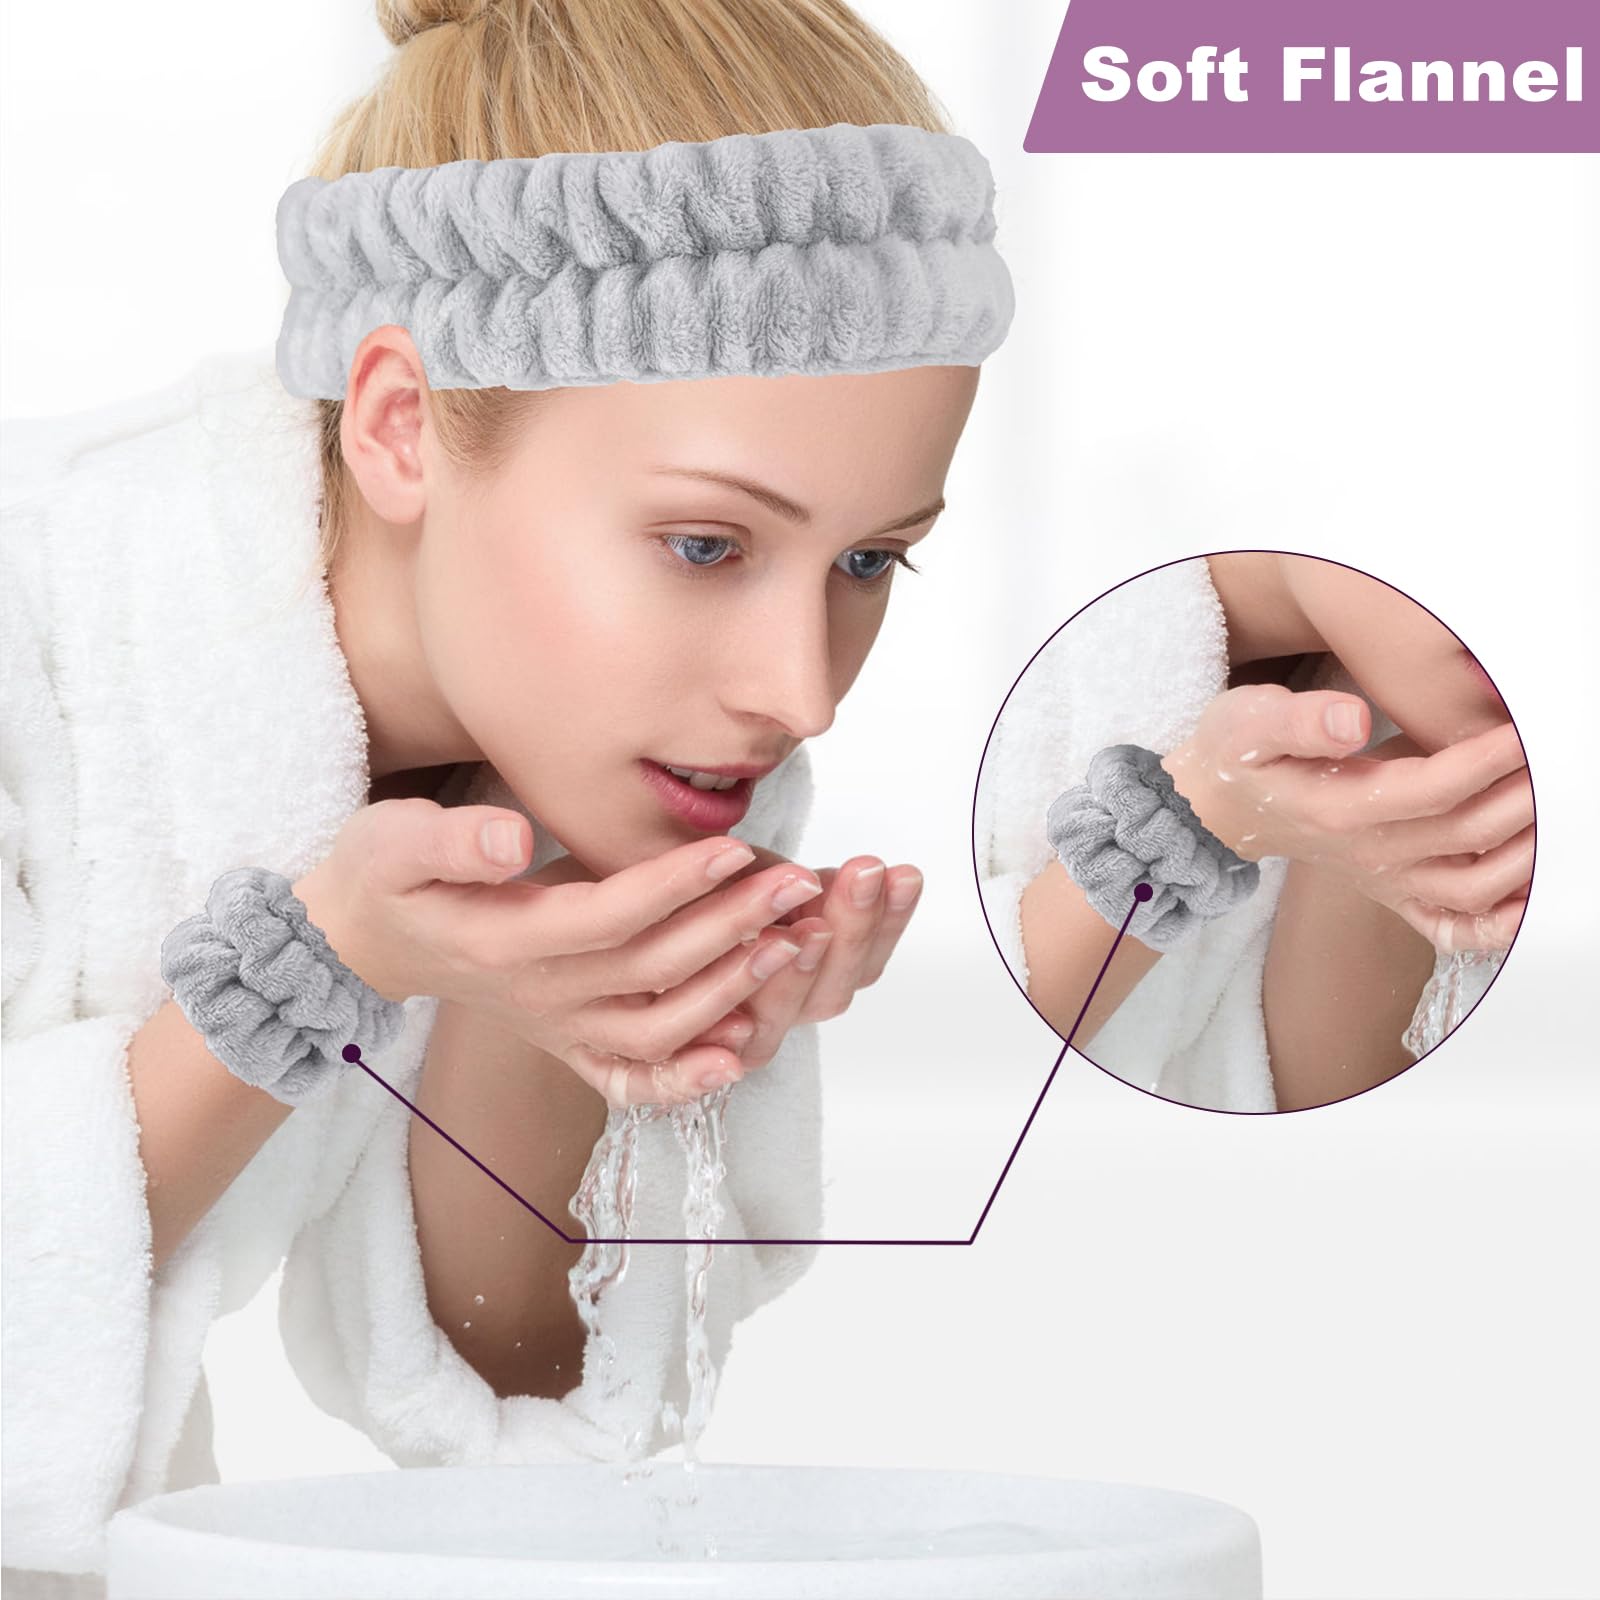 Facial Cleansing Brush- Hotodeal Silicone Magnetic Rechargeable Face Brush